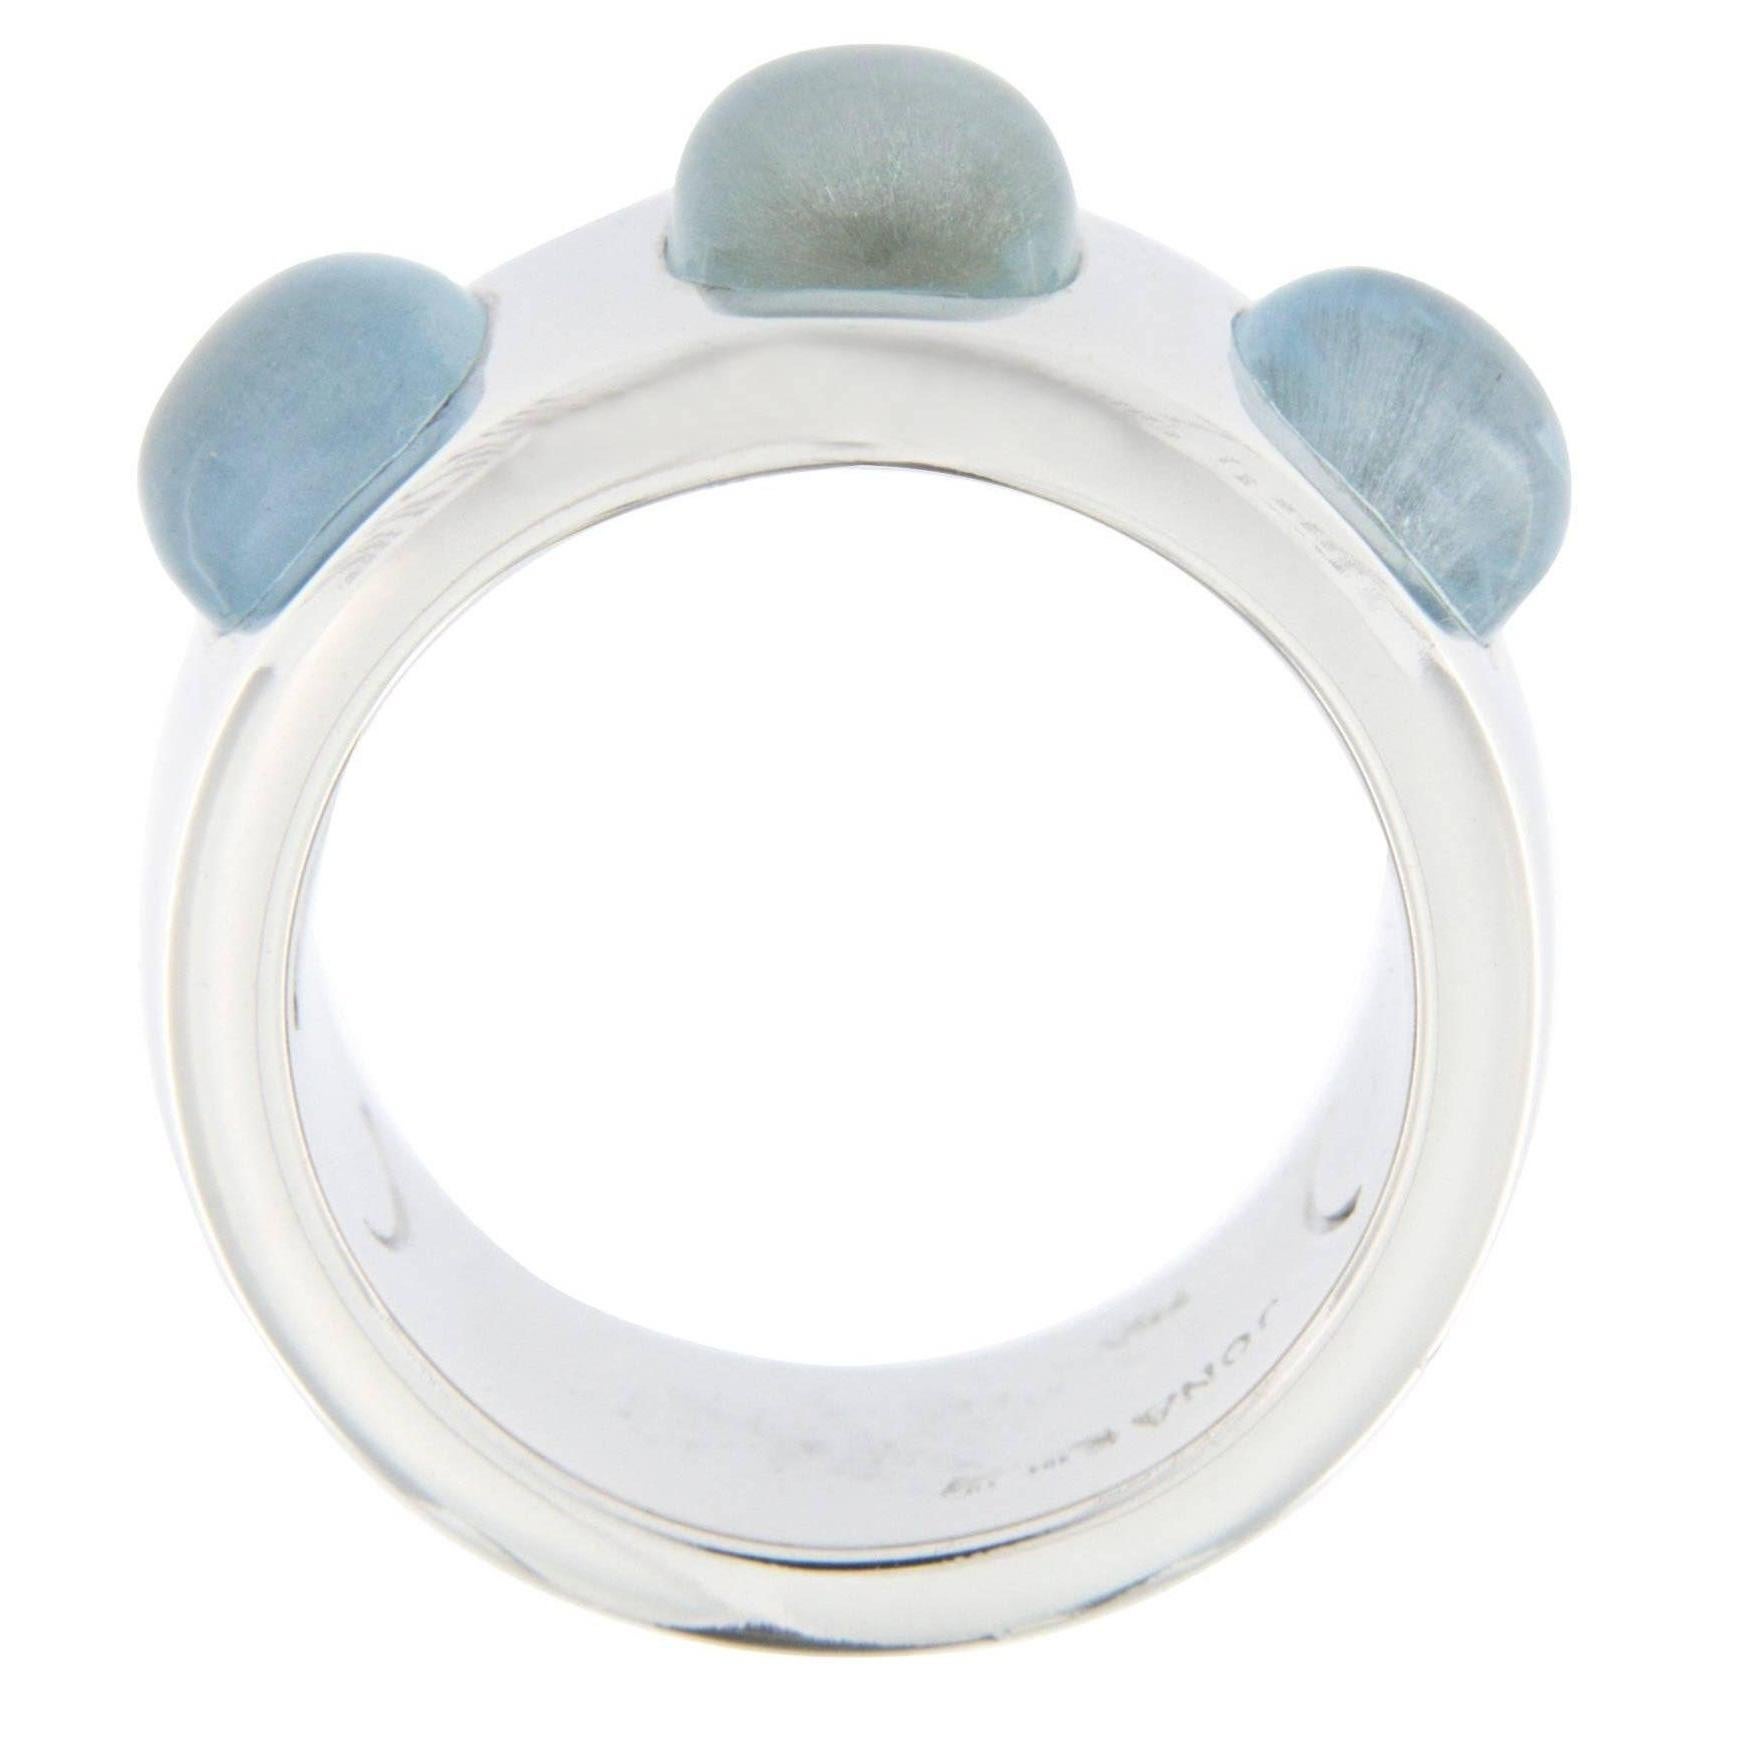 Alex Jona design collection, hand crafted in Italy, 18 karat white gold band ring set with three aquamarine cabochon weighing 4.0 carats in total. US size 6 / EU size 12. Can be made to order in 3o working days.
Dimensions:
H 0.95 in. x W 0.84 in x